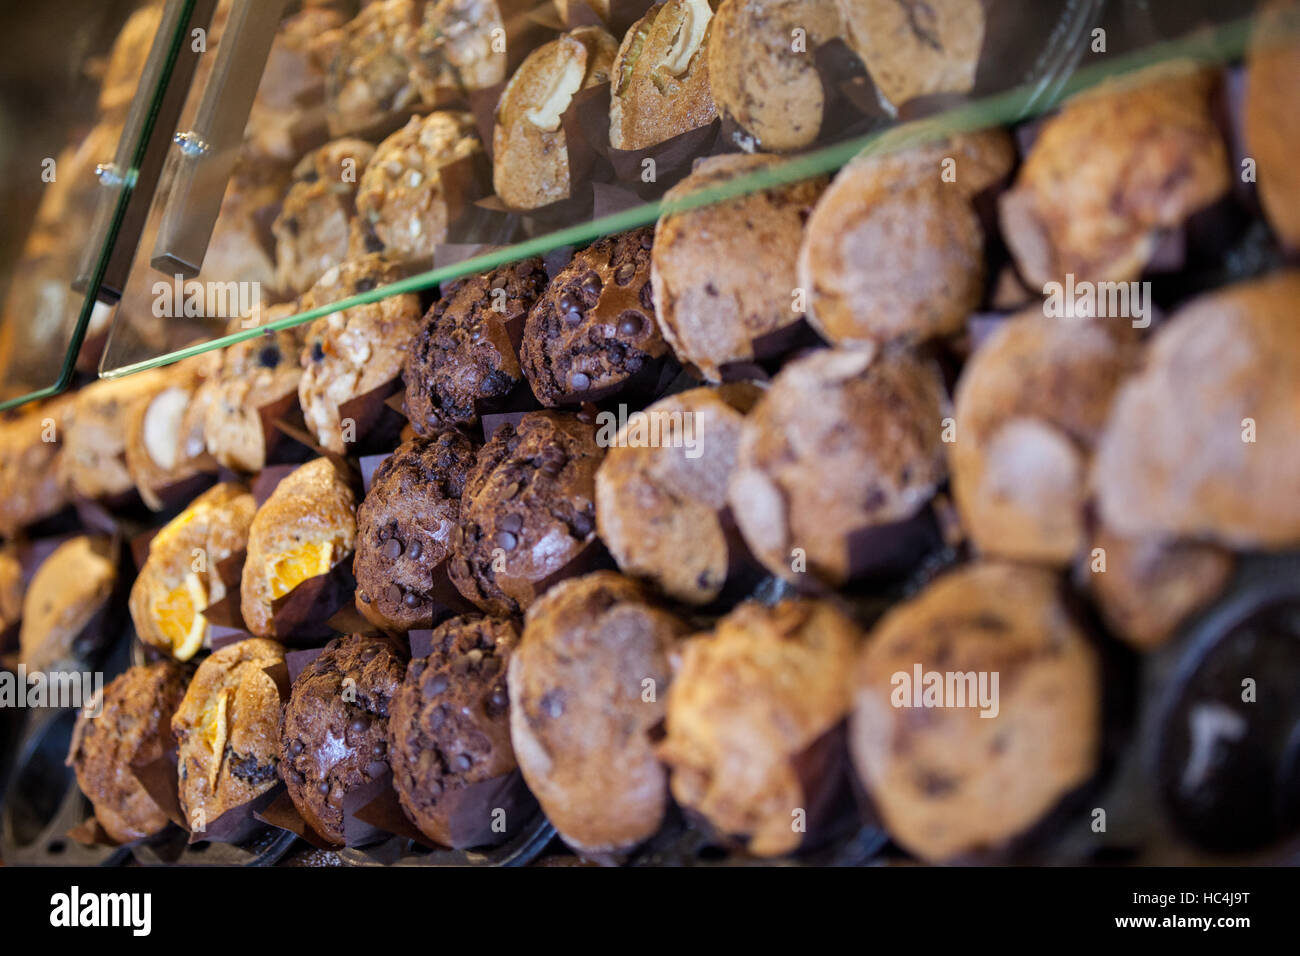 Close-up of cookies in display Stock Photo